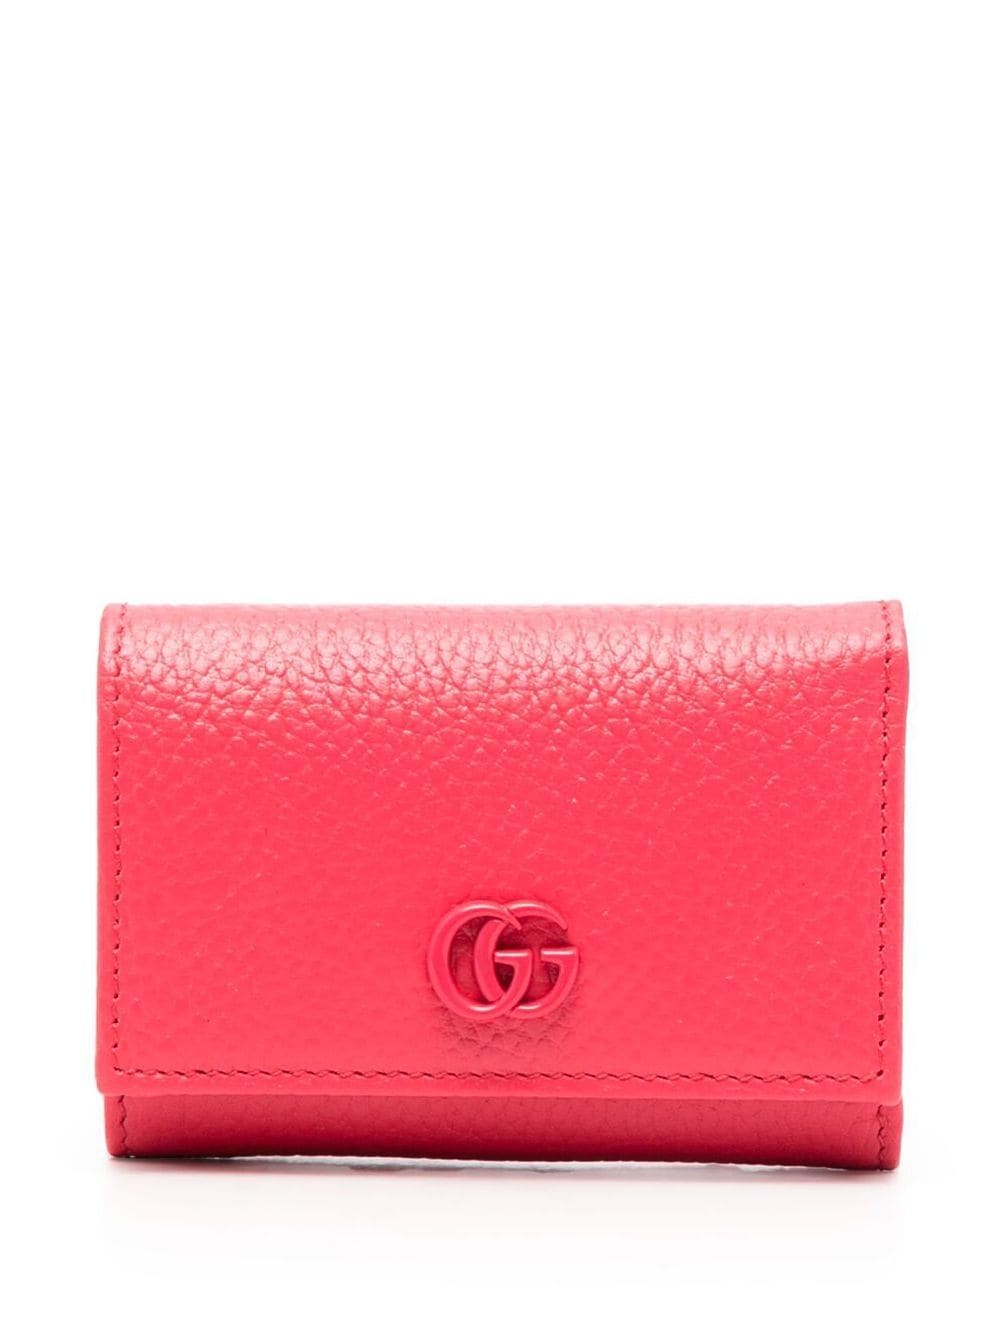 Gucci logo-plaque leather wallet - Pink